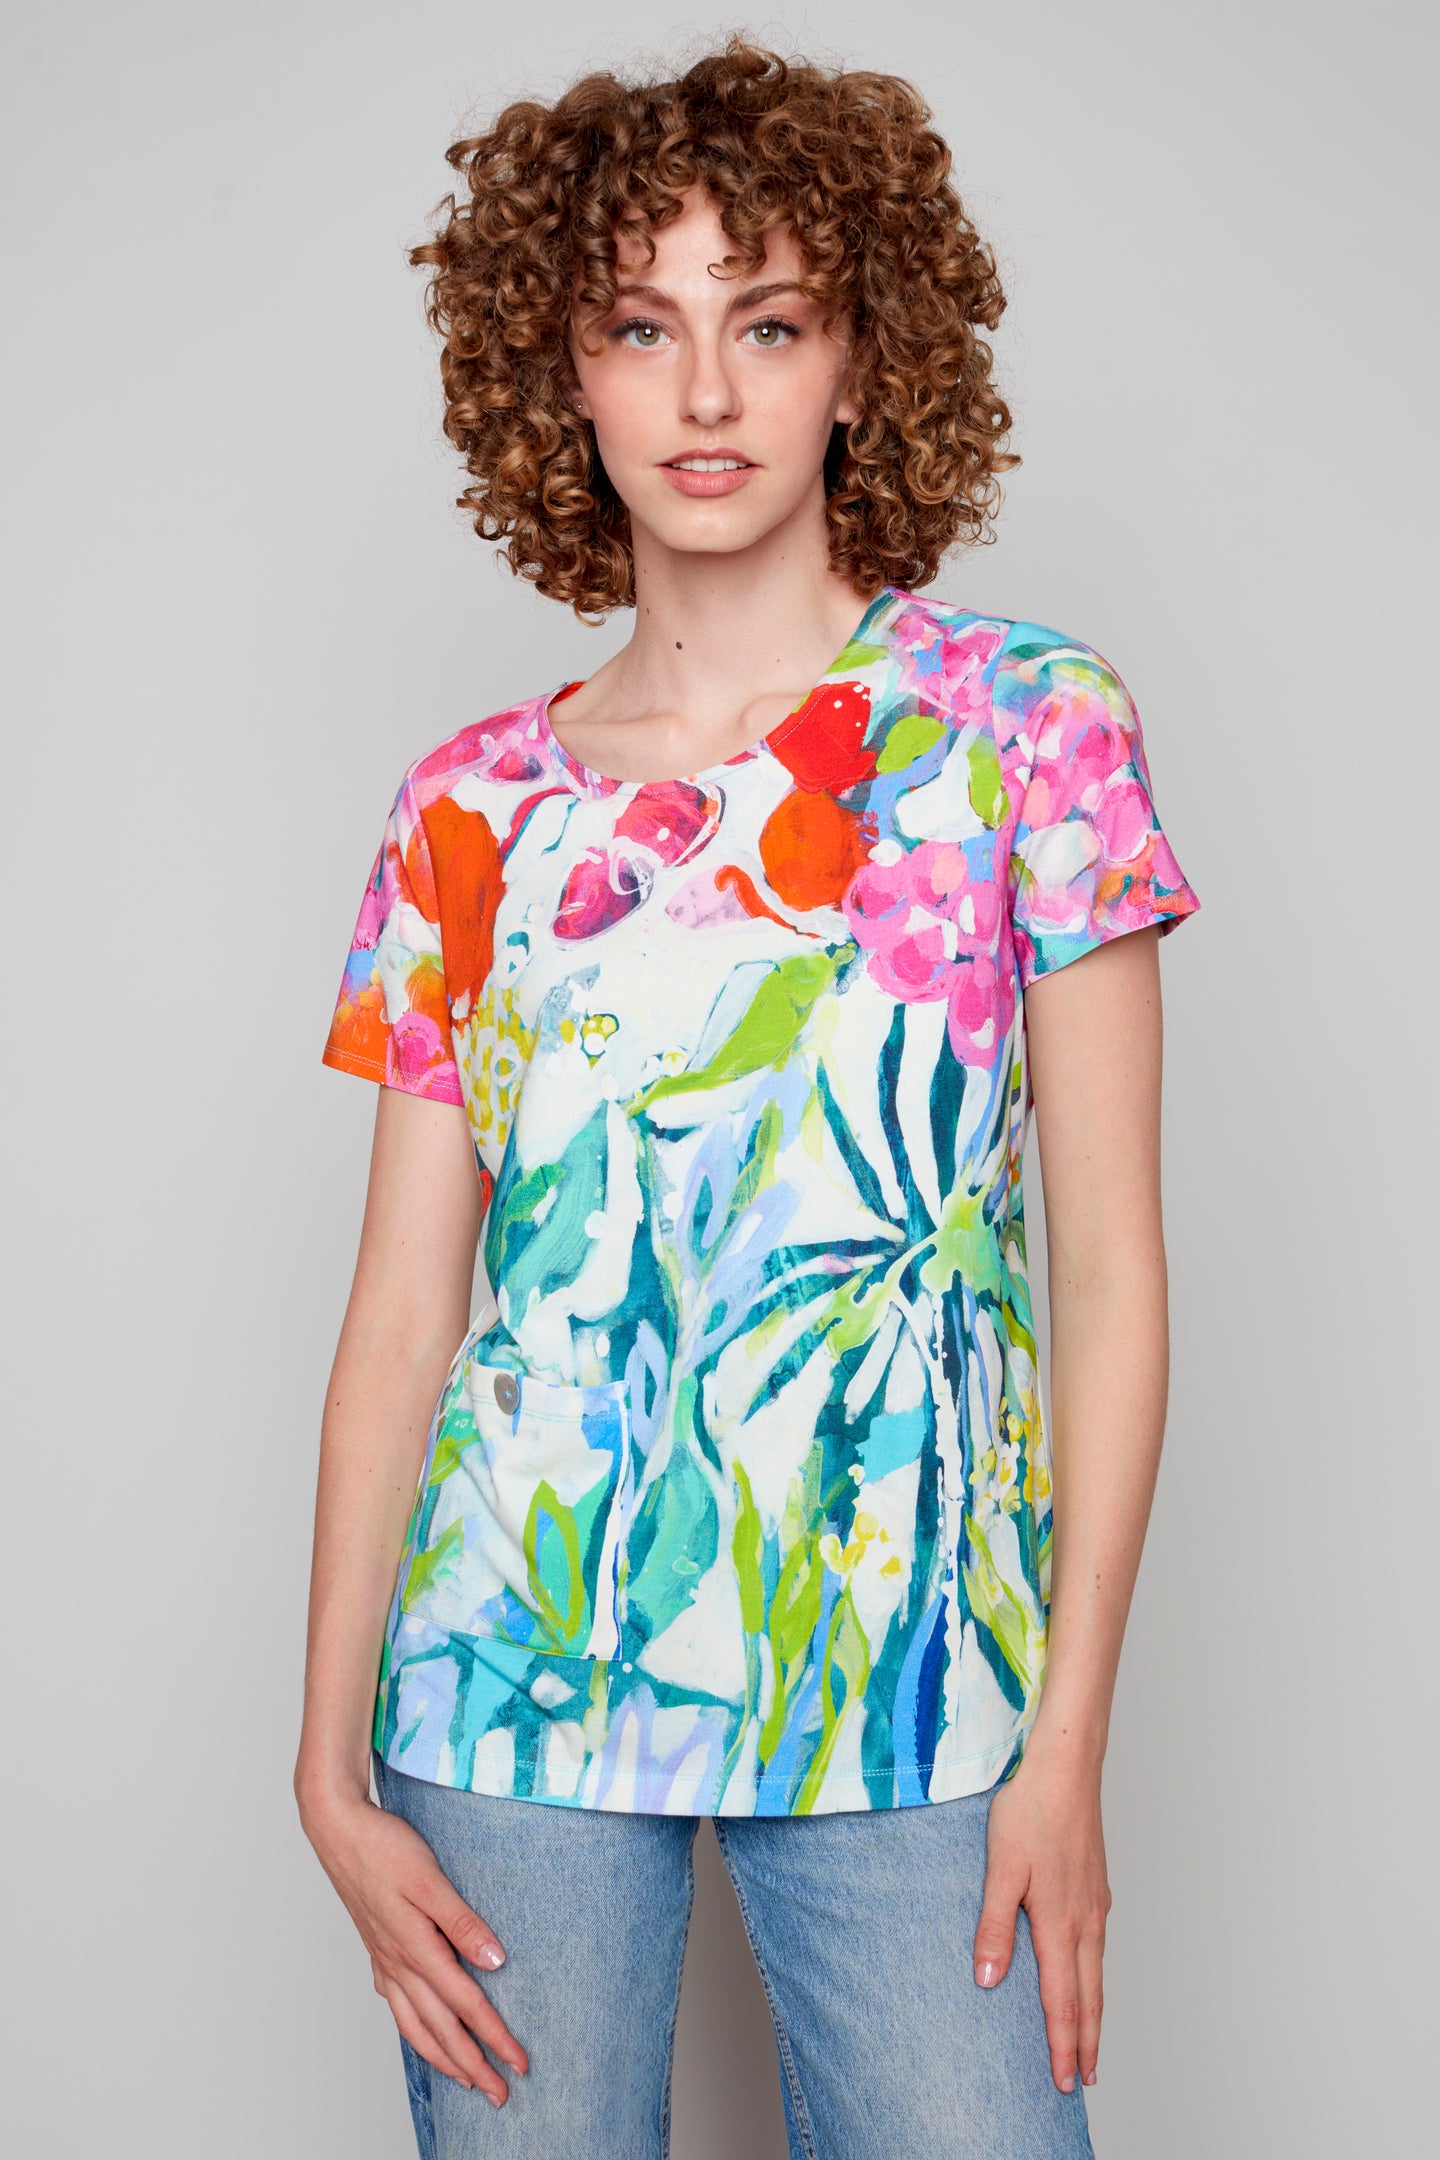 At Liberty in the Garden short sleeve t-shirt with front pocket